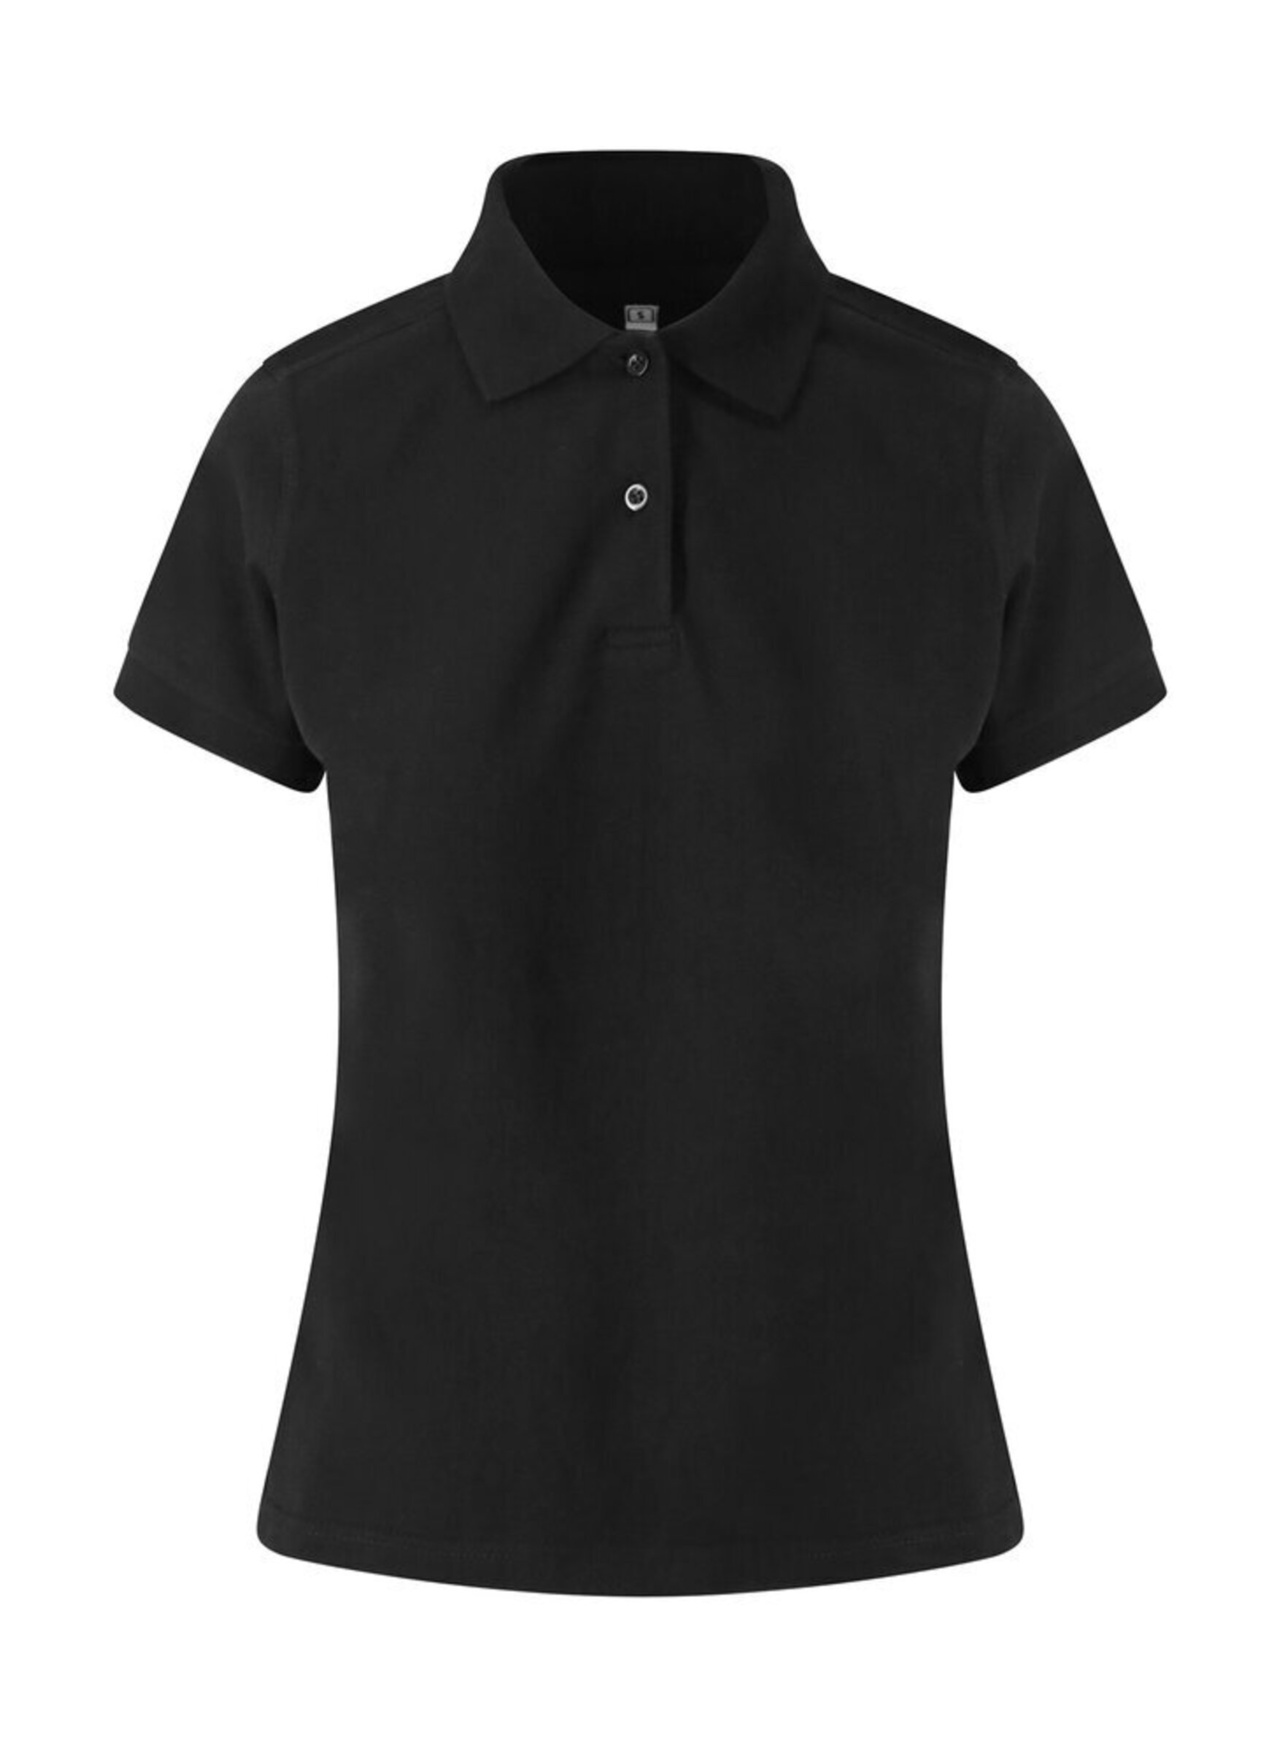 Just Polos Women's Stretch Polo - Black - L